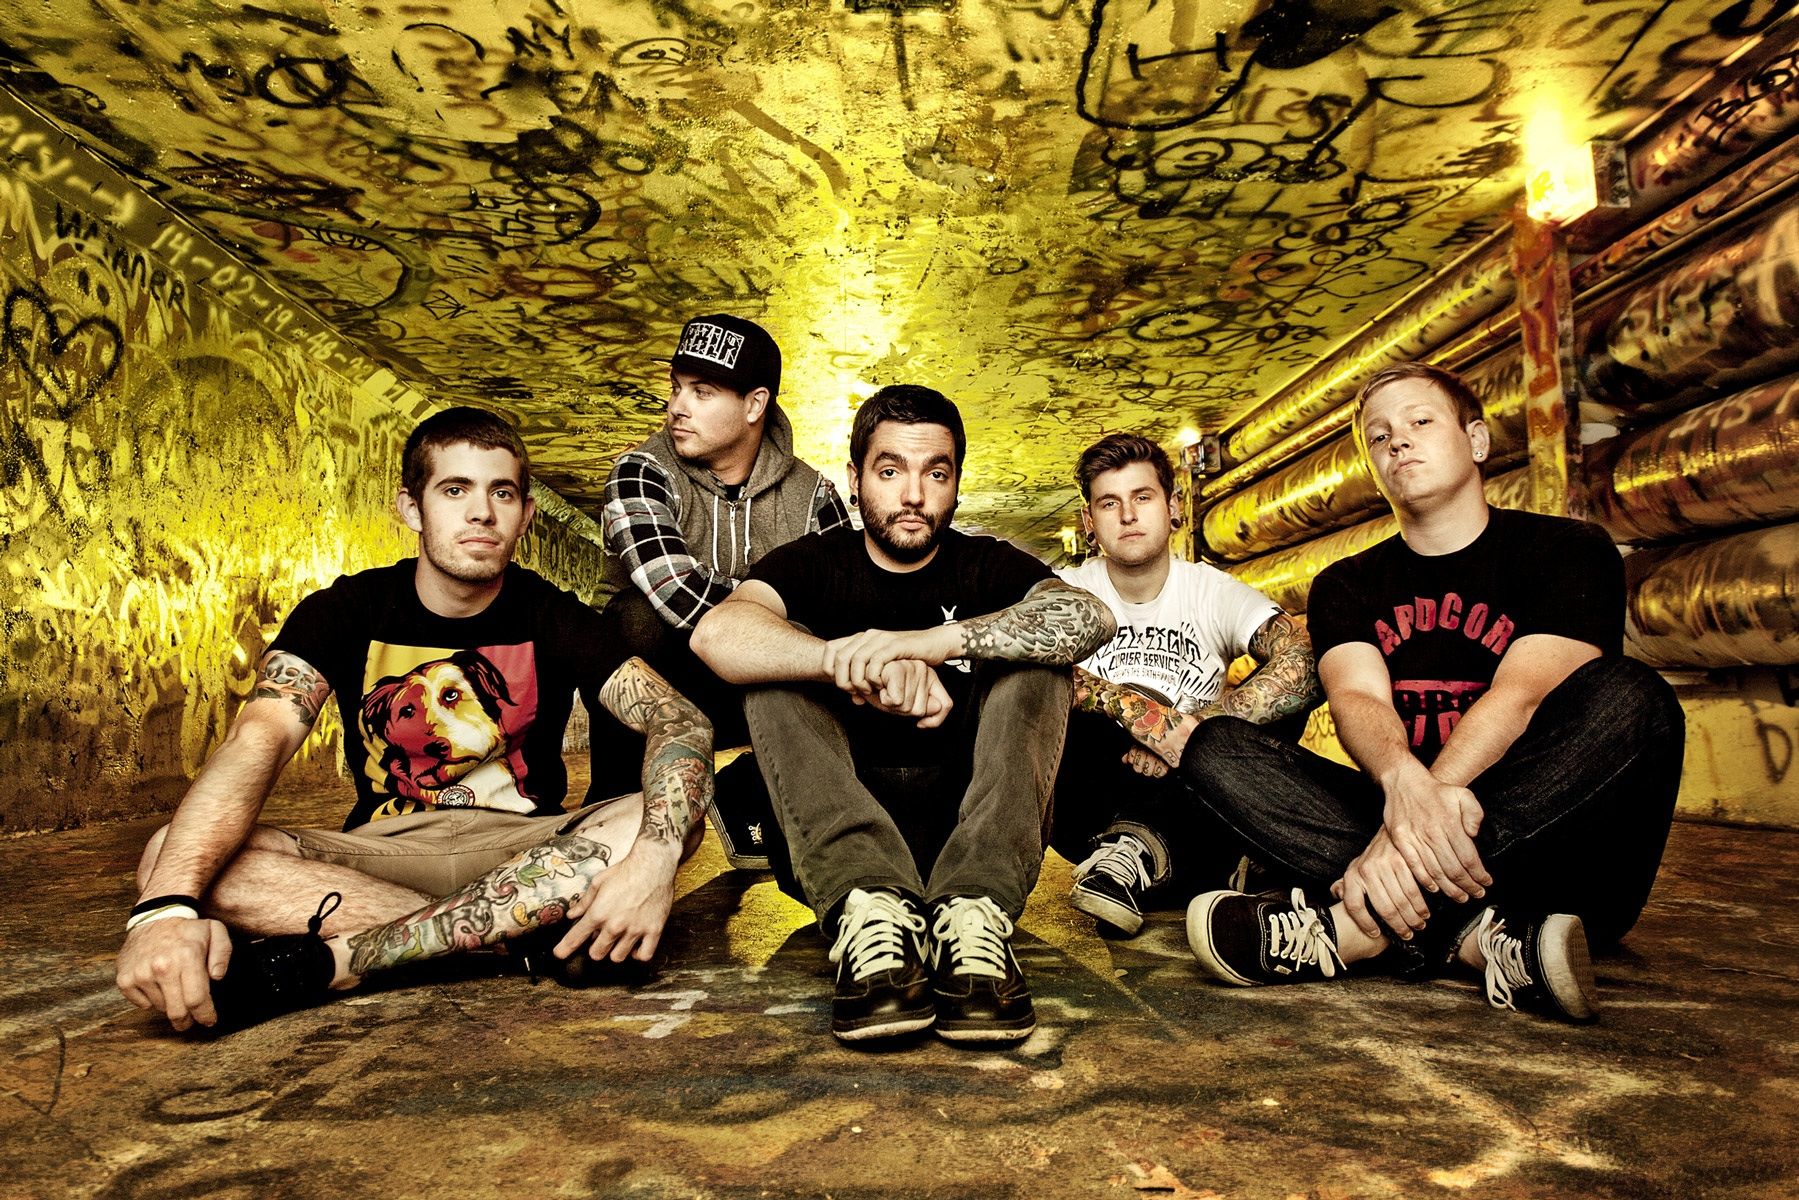 Name A Day To Remember Wallpaper Category Image